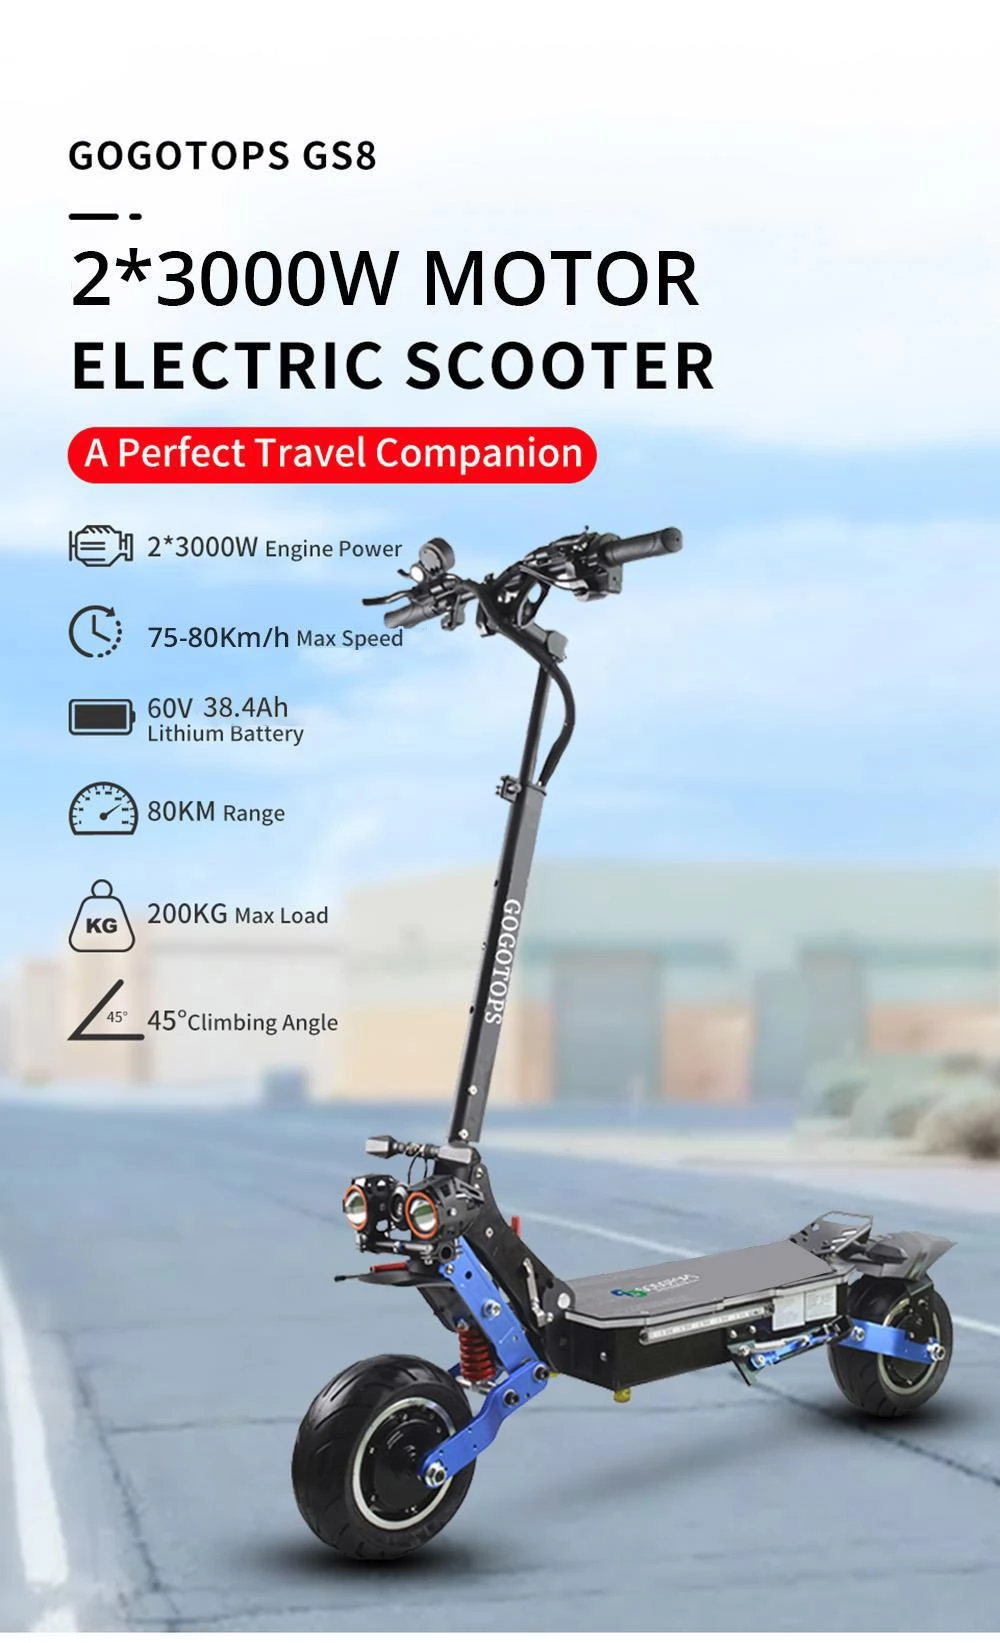 GOGOTOPS GS8 10 inch Road Tire Electric Scooter without Seat - 3000W*2 Dual Motors & 38.4Ah Battery for 80km Range